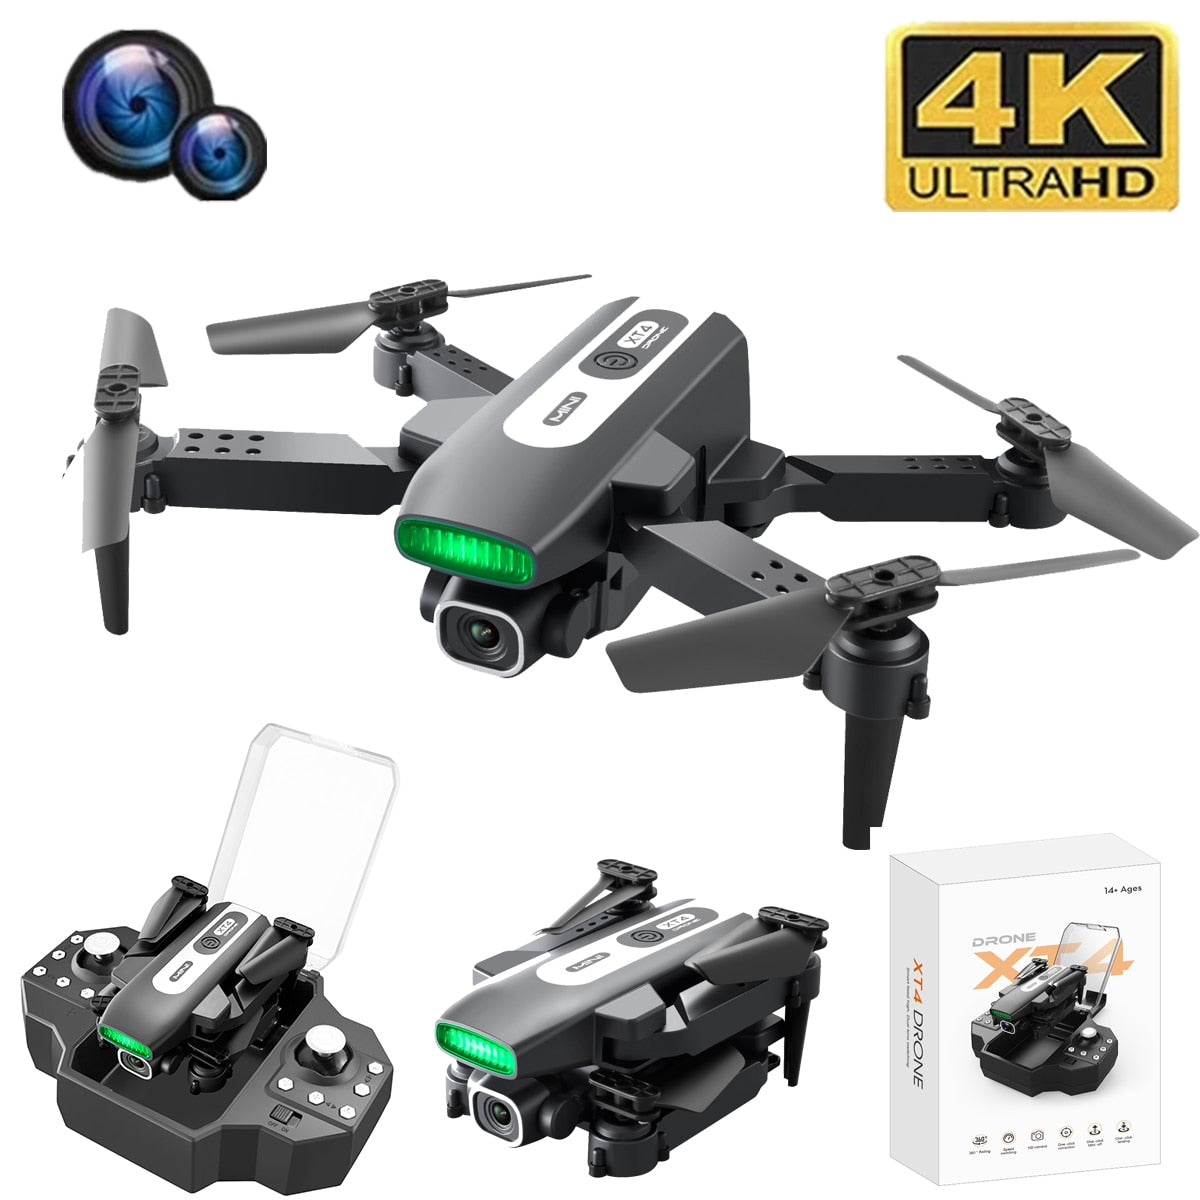 XT4 Mini Drone - 4K 1080P HD Camera WiFi Fpv Air Pressure Altitude Hold Foldable Quadcopter RC Dron Kid Toy Boys GIfts